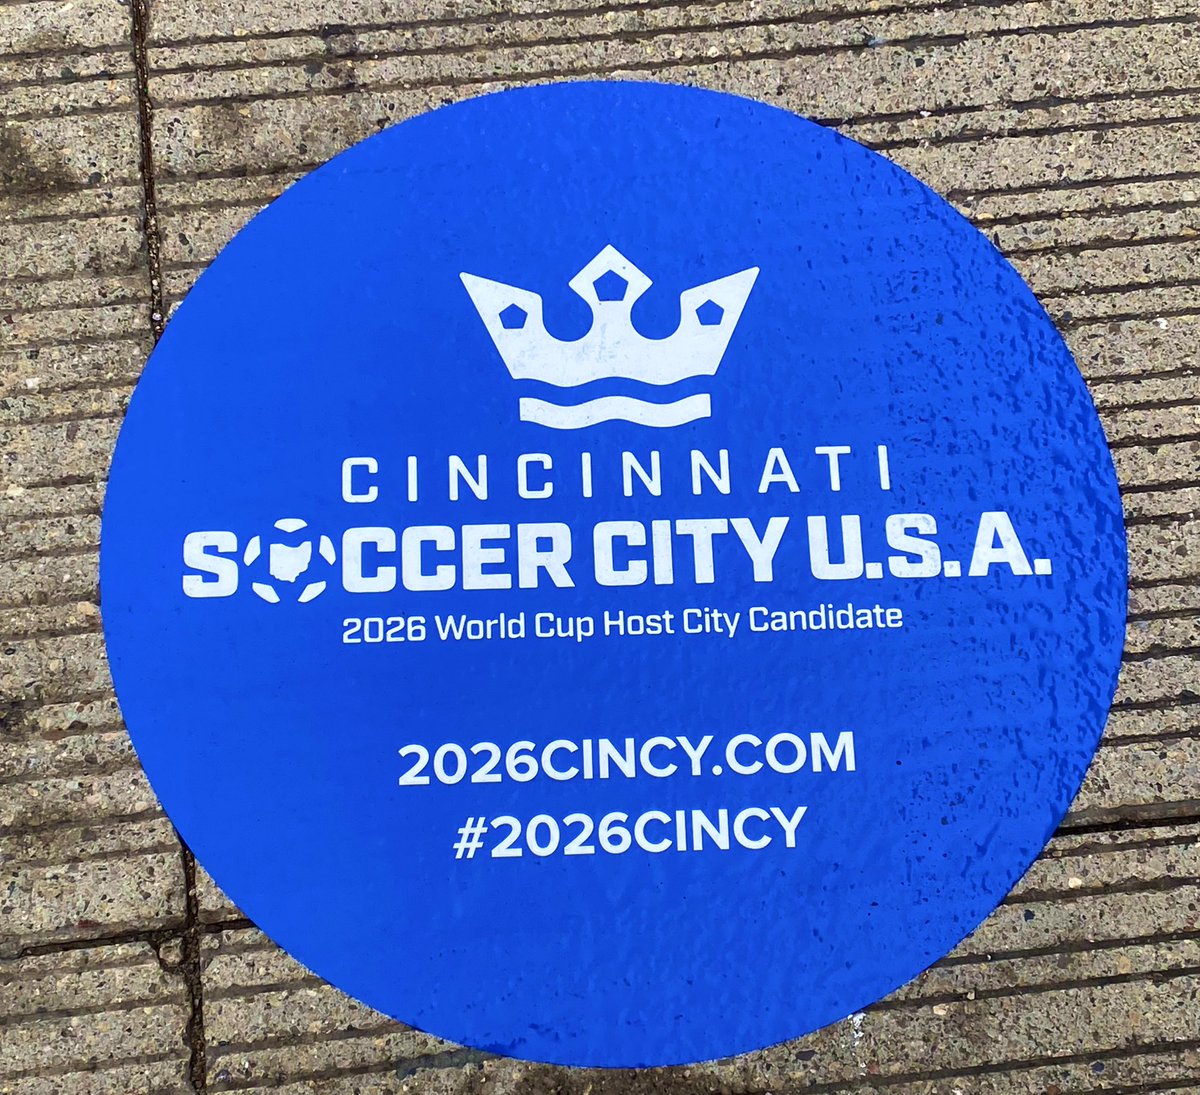 Today, #CincyWelcomesTheWorld to help bring #FIFA World Cup to the Queen City in 2026. #2026cincy #OhioWantsTheCup.